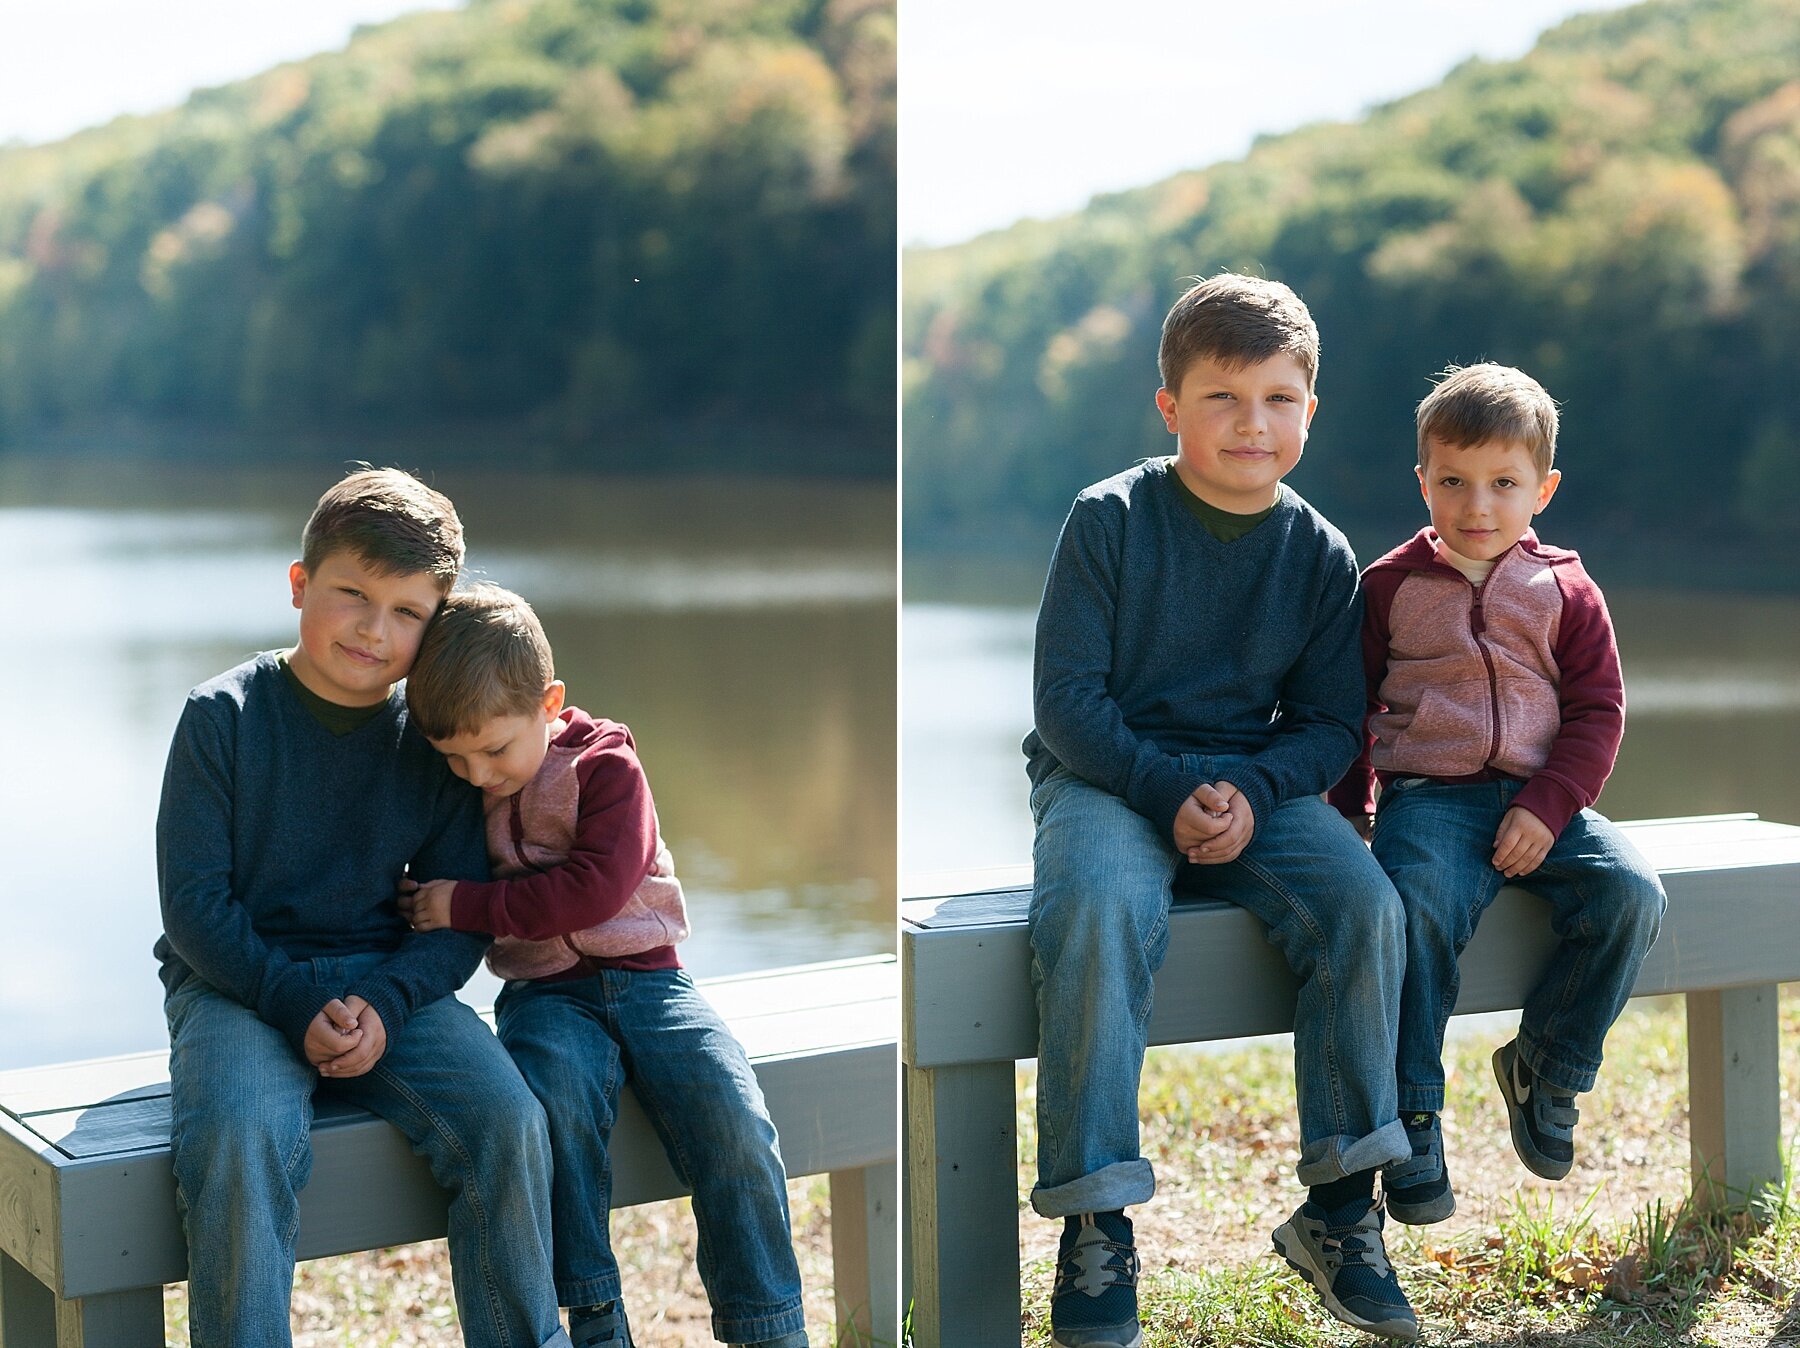 Wendy Zook Photography | Frederick MD Family photographer, family photos in the fall, Frederick family photos, Maryland family photographer, Maryland family photos, fall family portraits, Frederick Maryland family photos